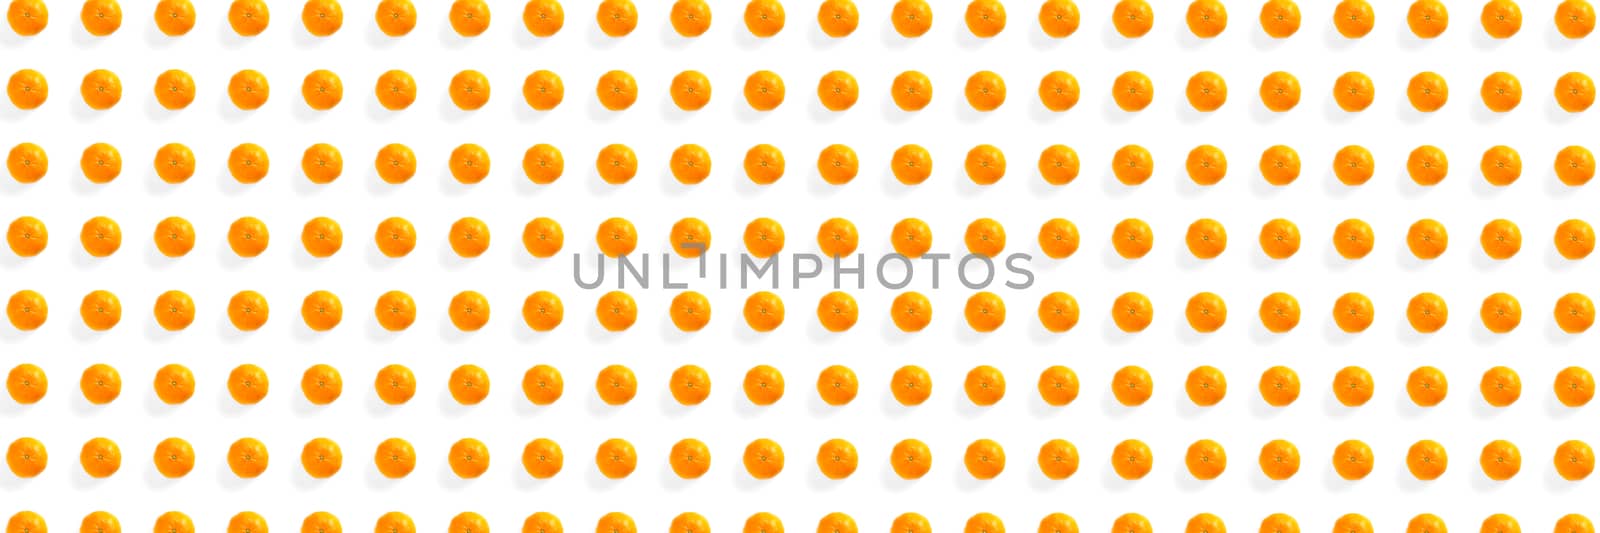 Isolated tangerine citrus collection background. Whole tangerines or mandarin orange fruits isolated on white background Banner not pattern